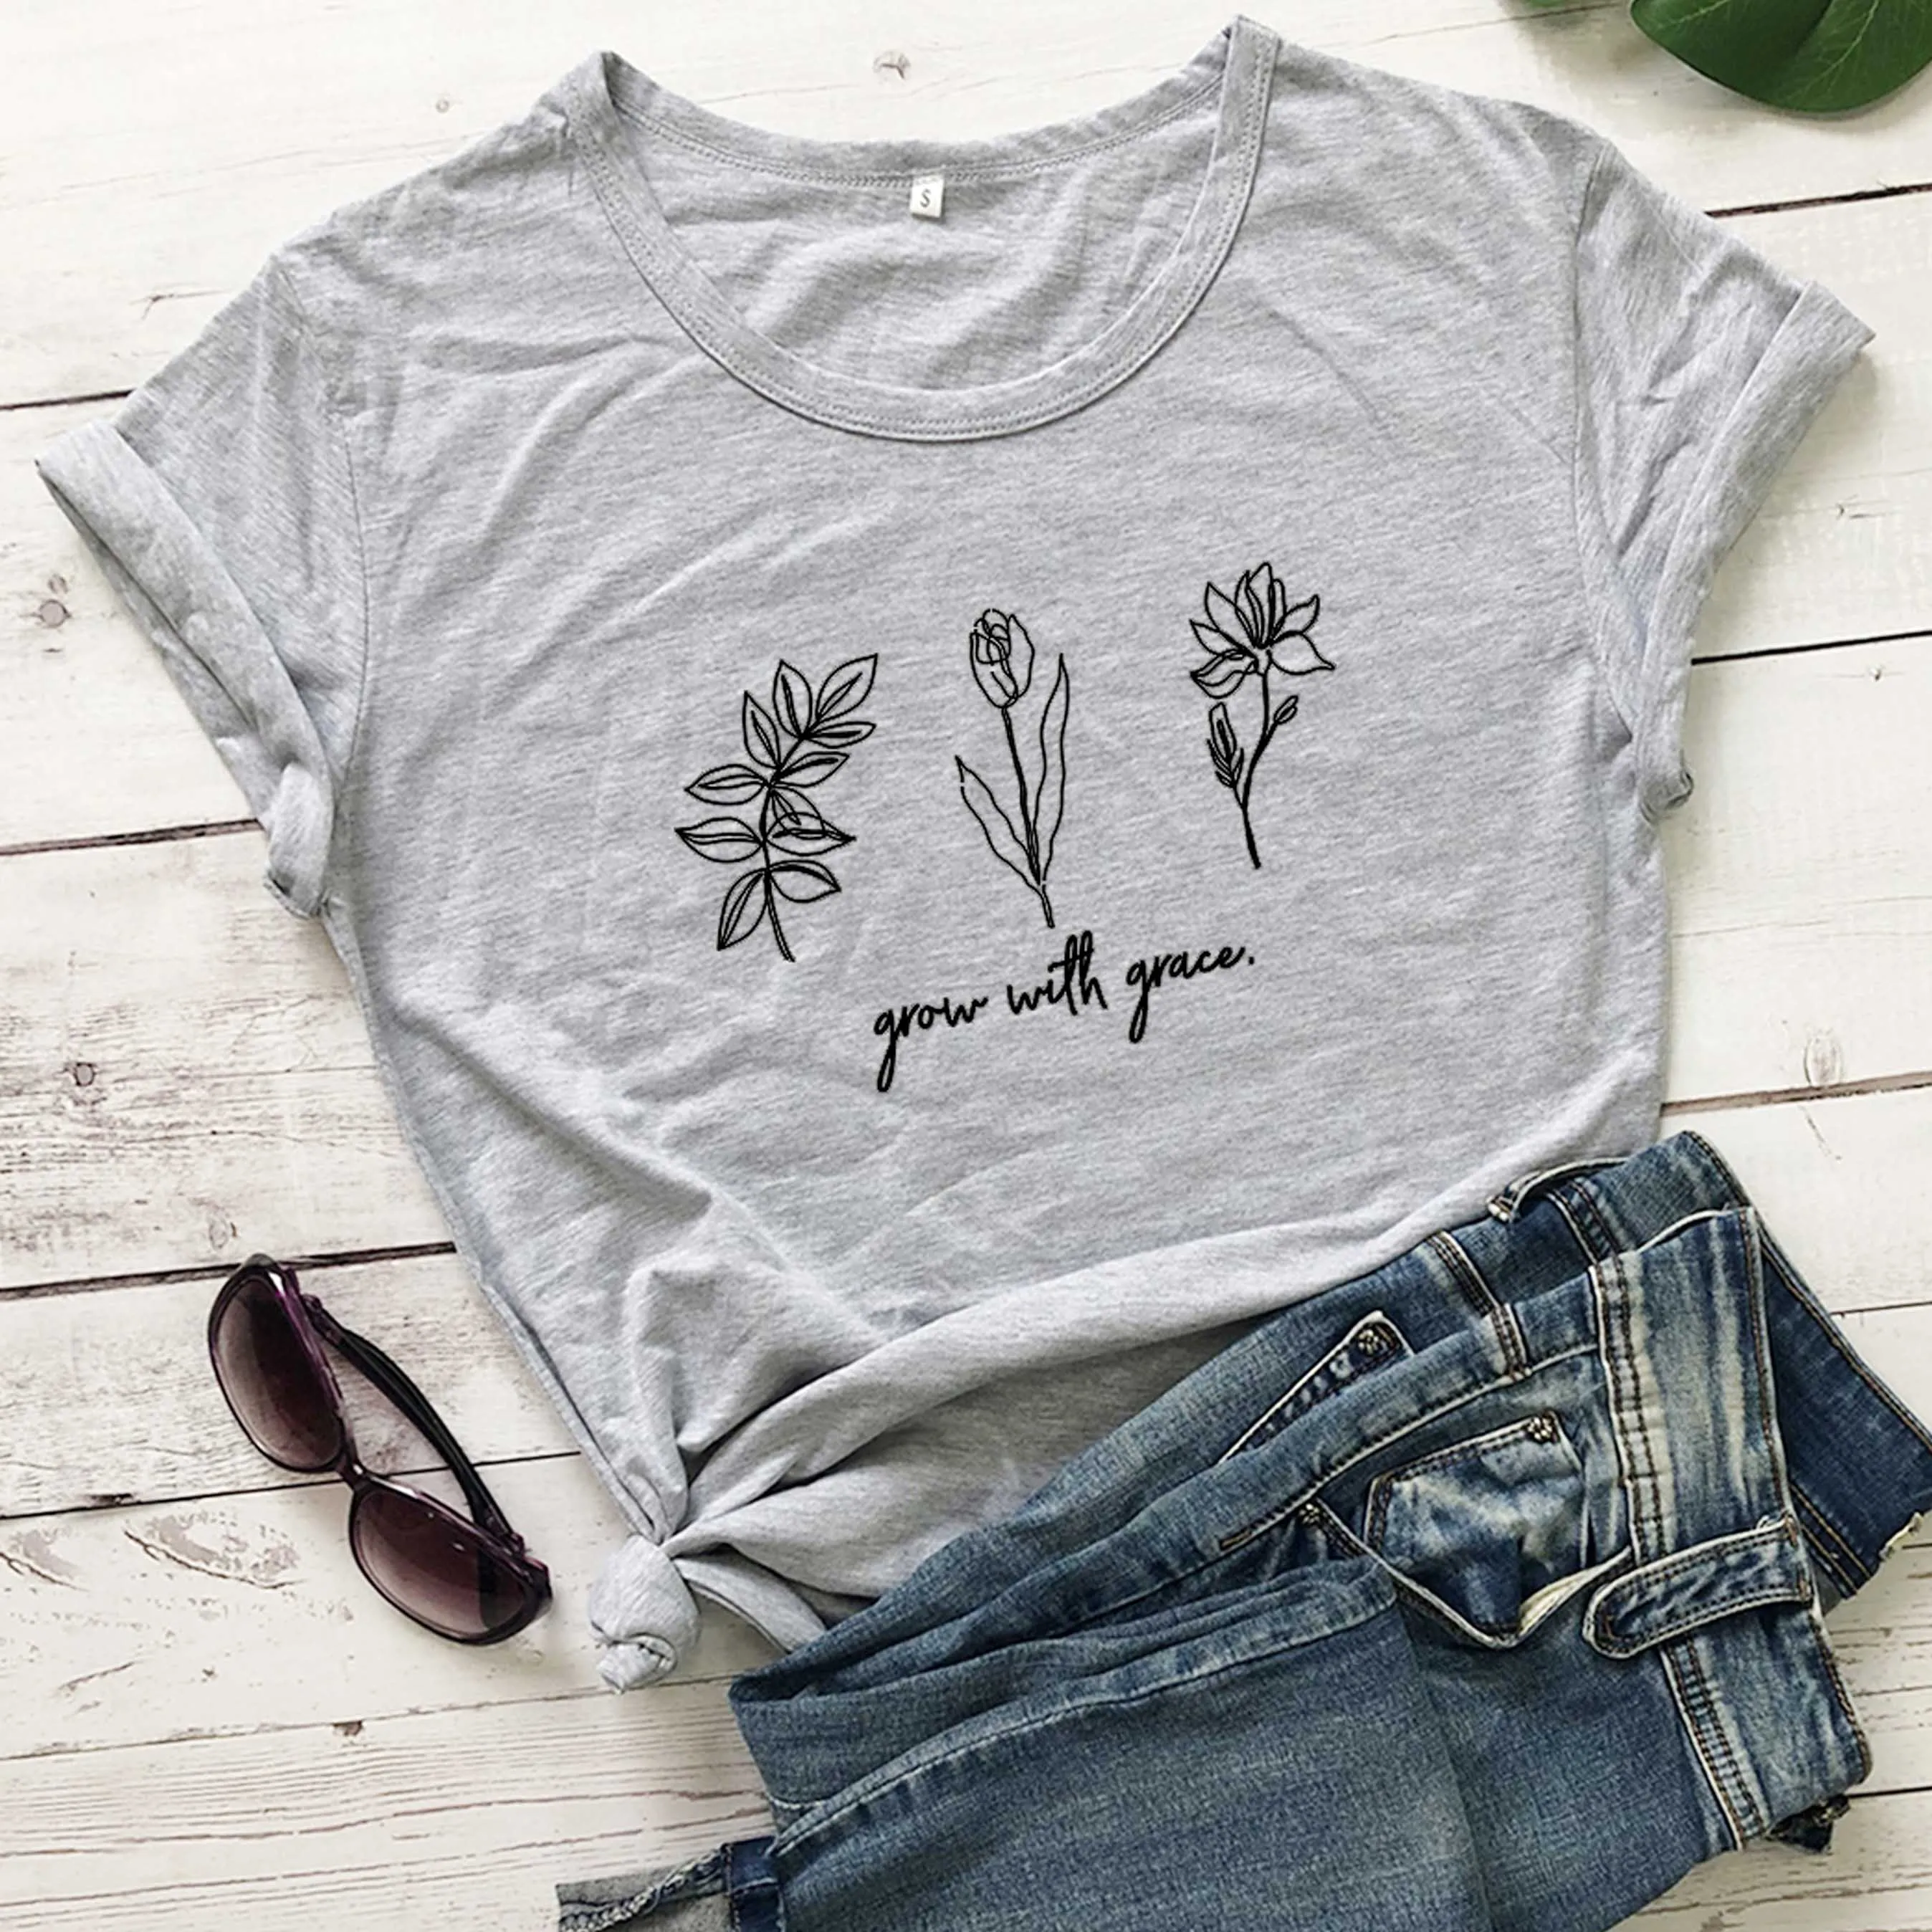 

Grow With Grace t shirt women fashion flowers graphic cute slogan grunge tumblr hipster tees vintage party young gift tops-L857